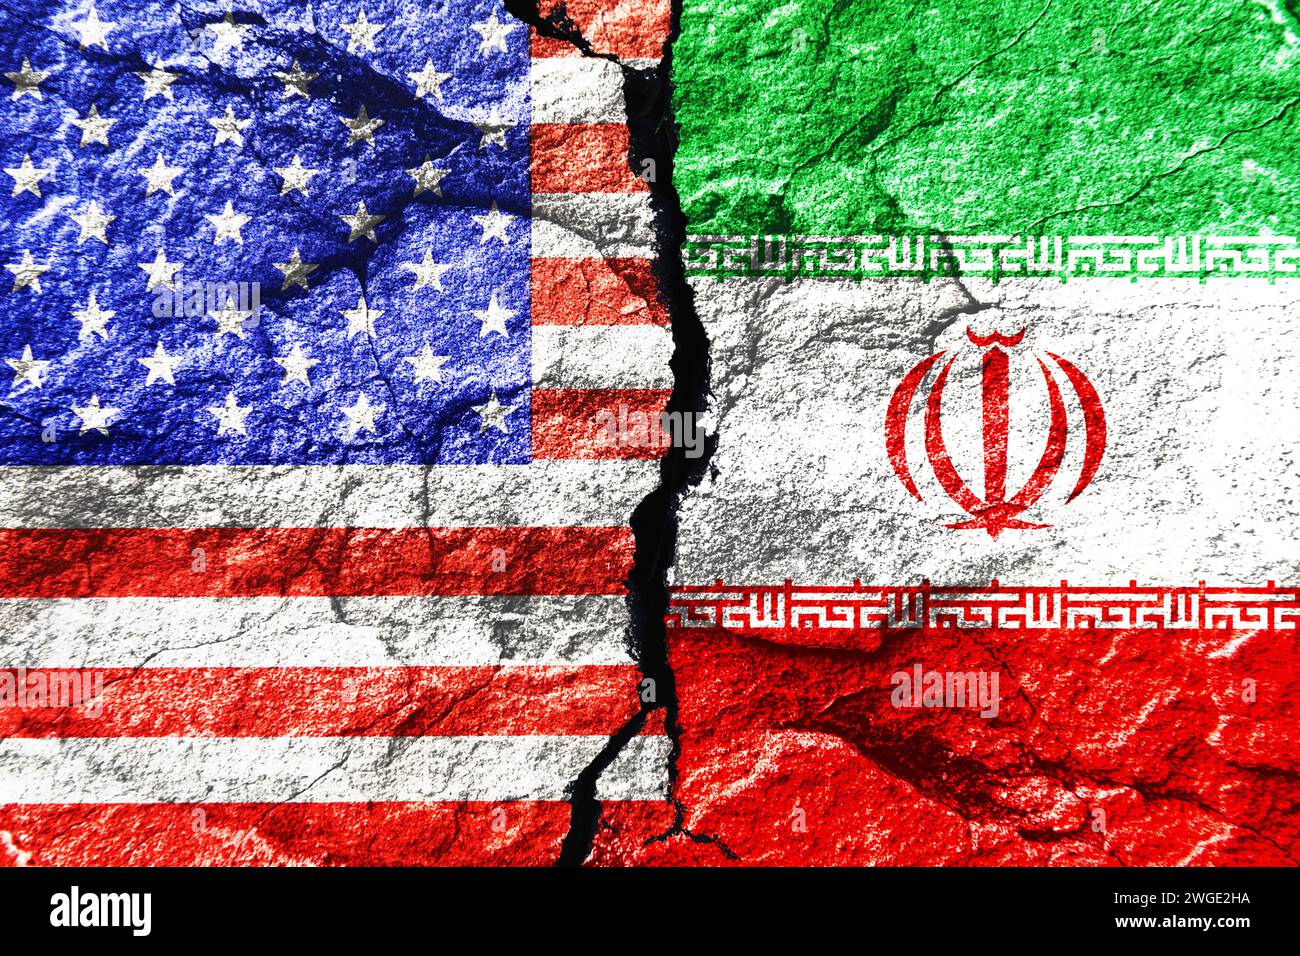 Flags Of The United States And Iran On A Broken Ground, Photo Assembly Stock Photo